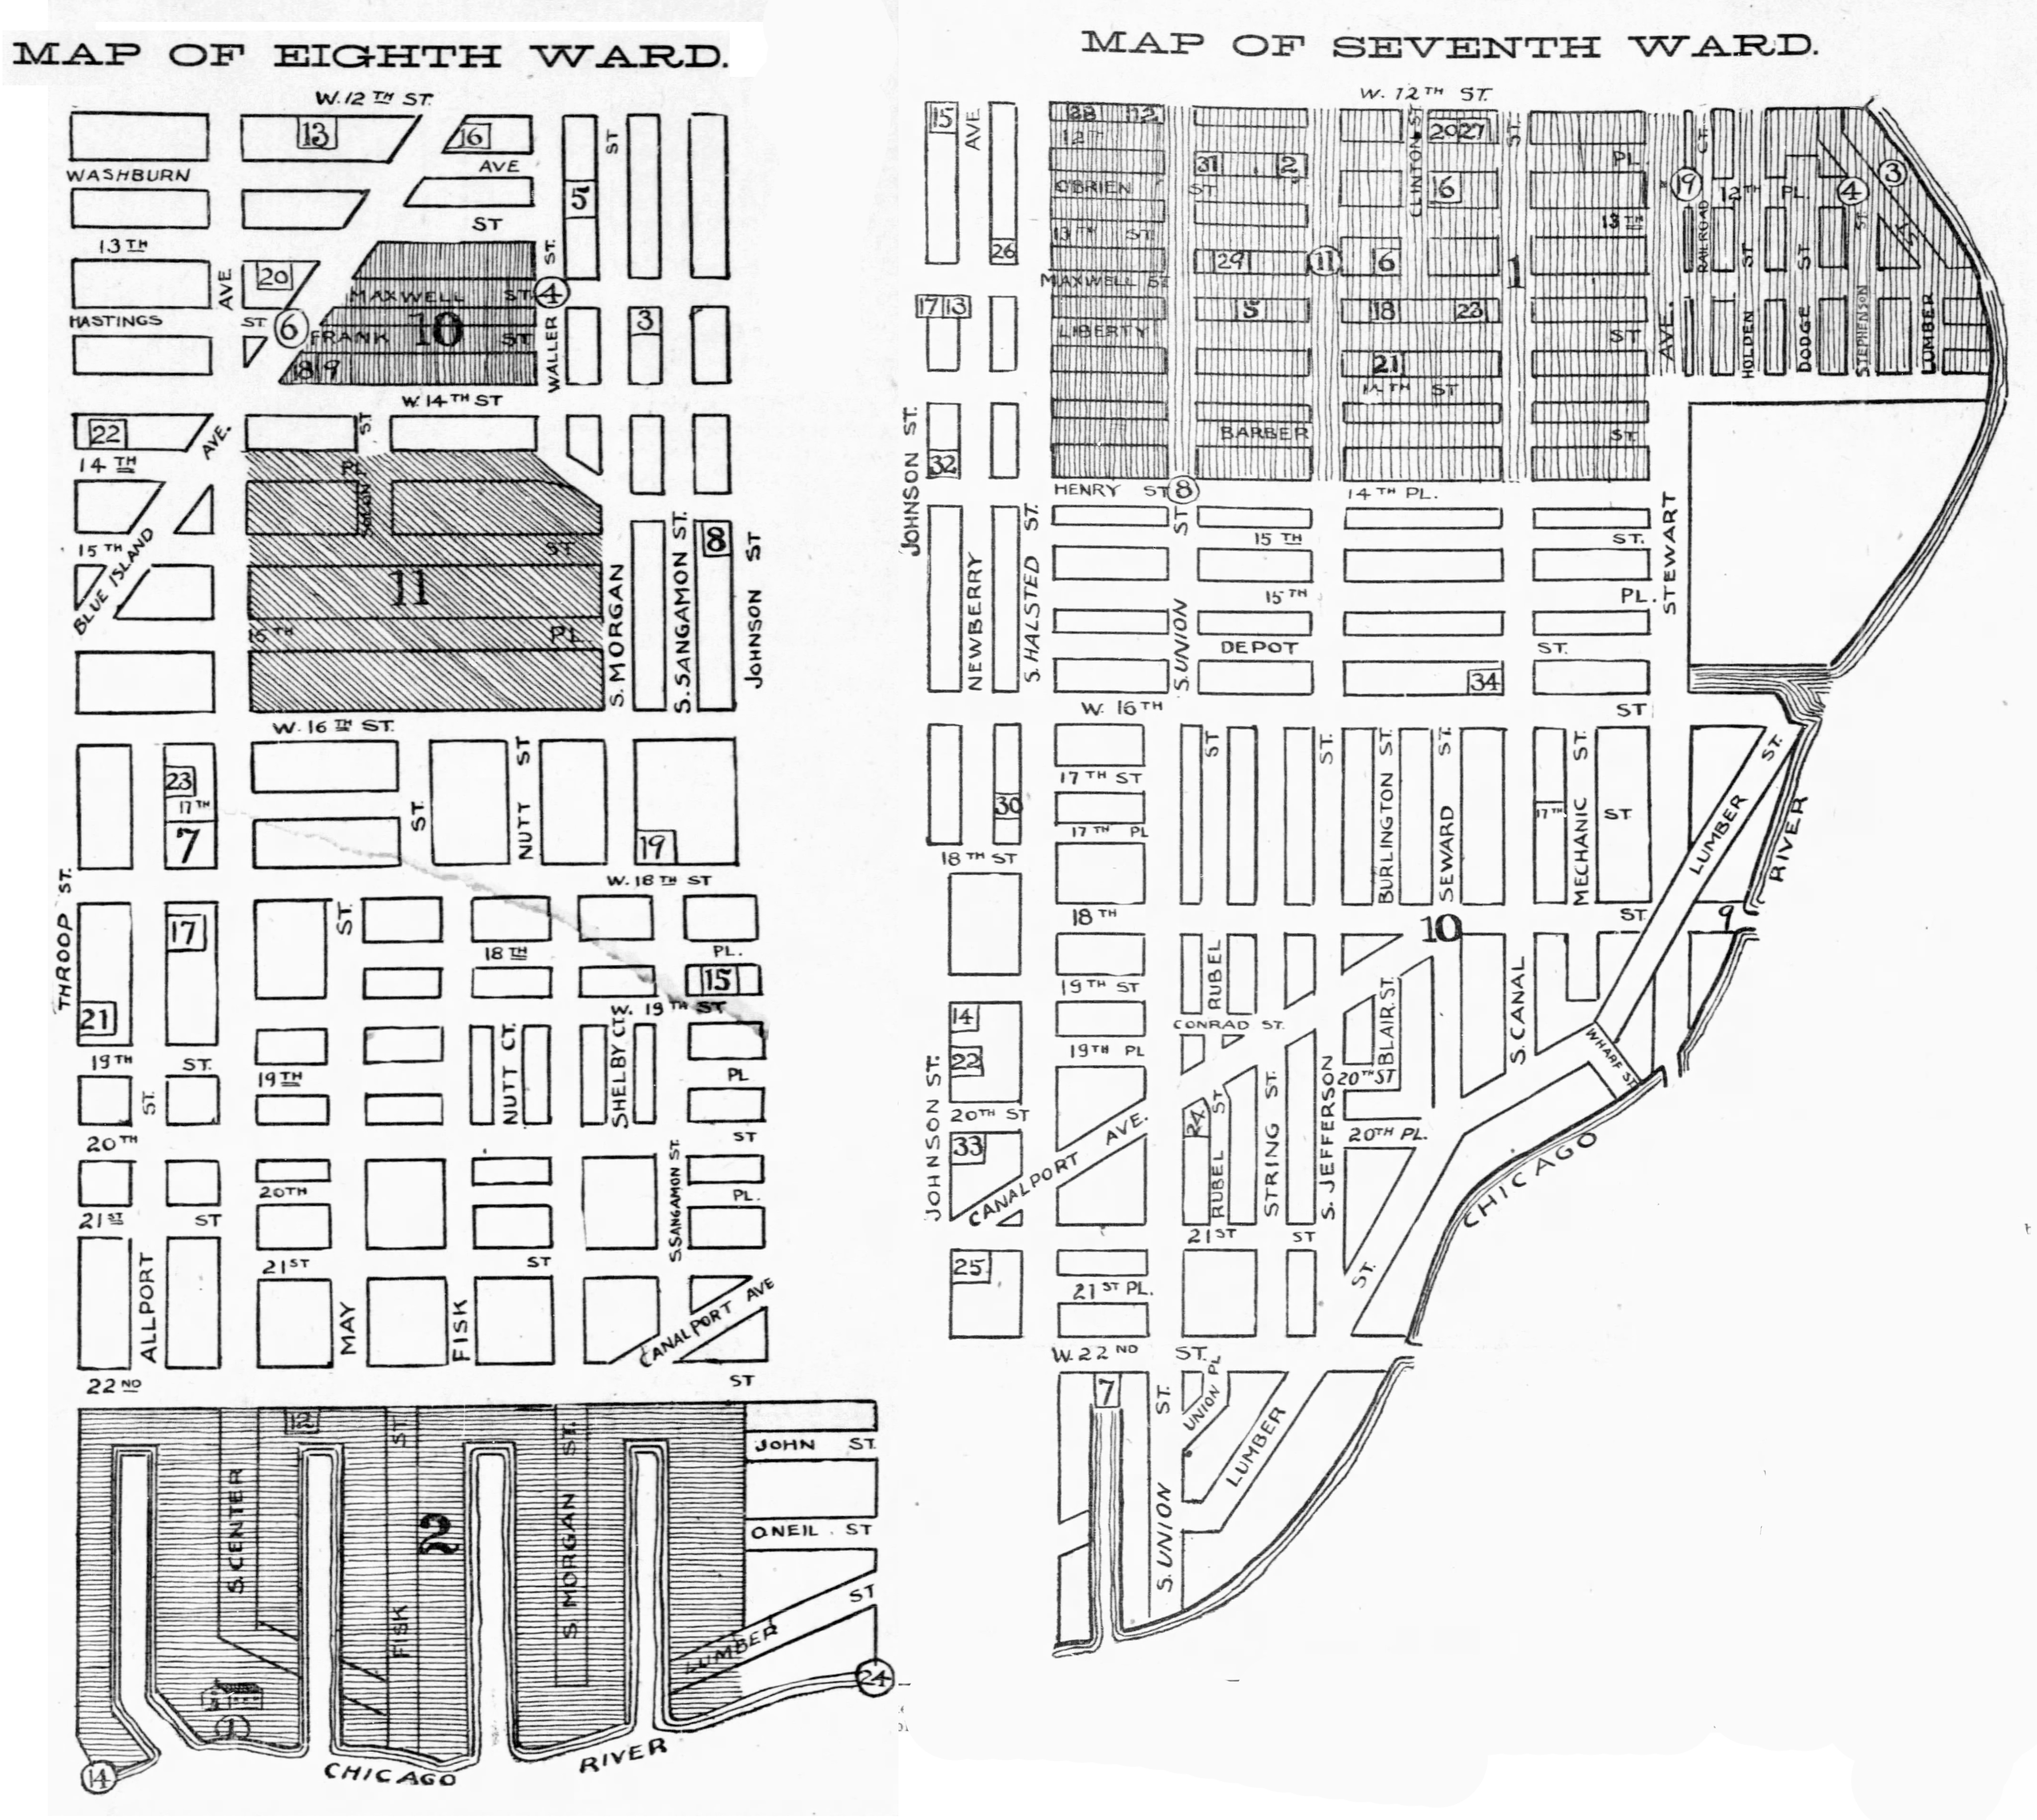 Wards Of Chicago In 1900 Part 5 Seventh Eighth Wards